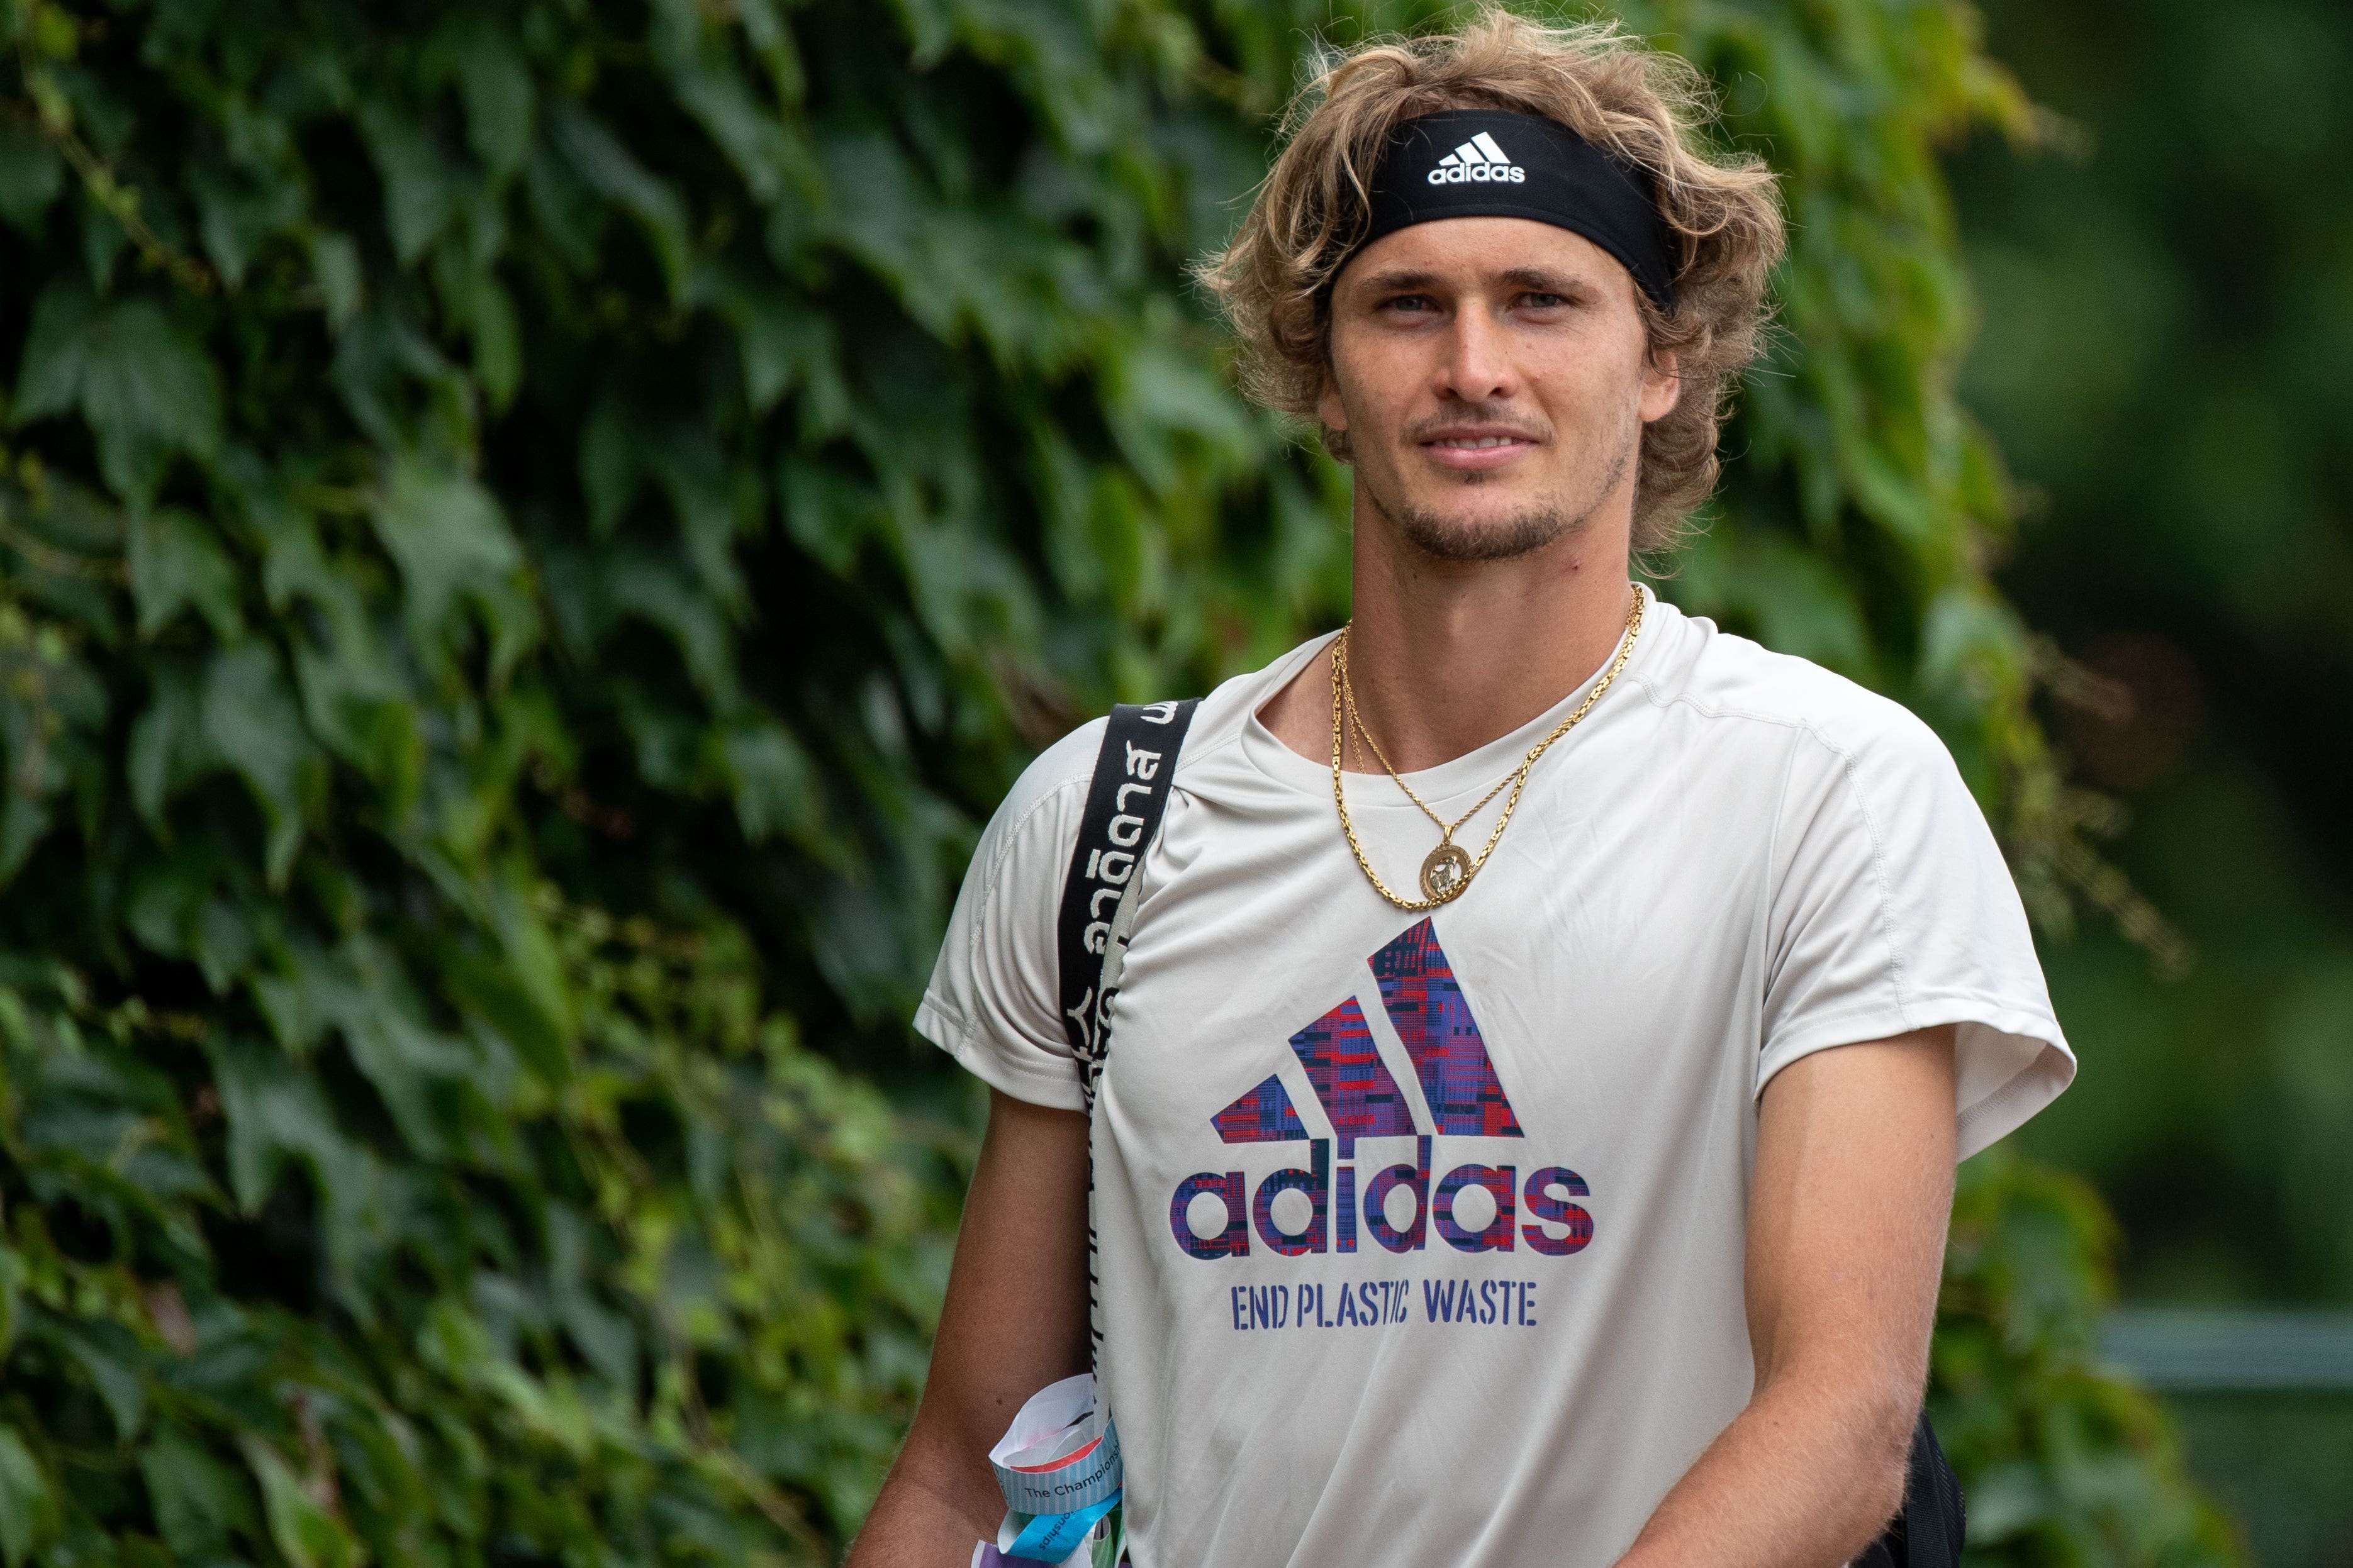 Alexander Zverev won’t face any action from the ATP over domestic abuse allegations